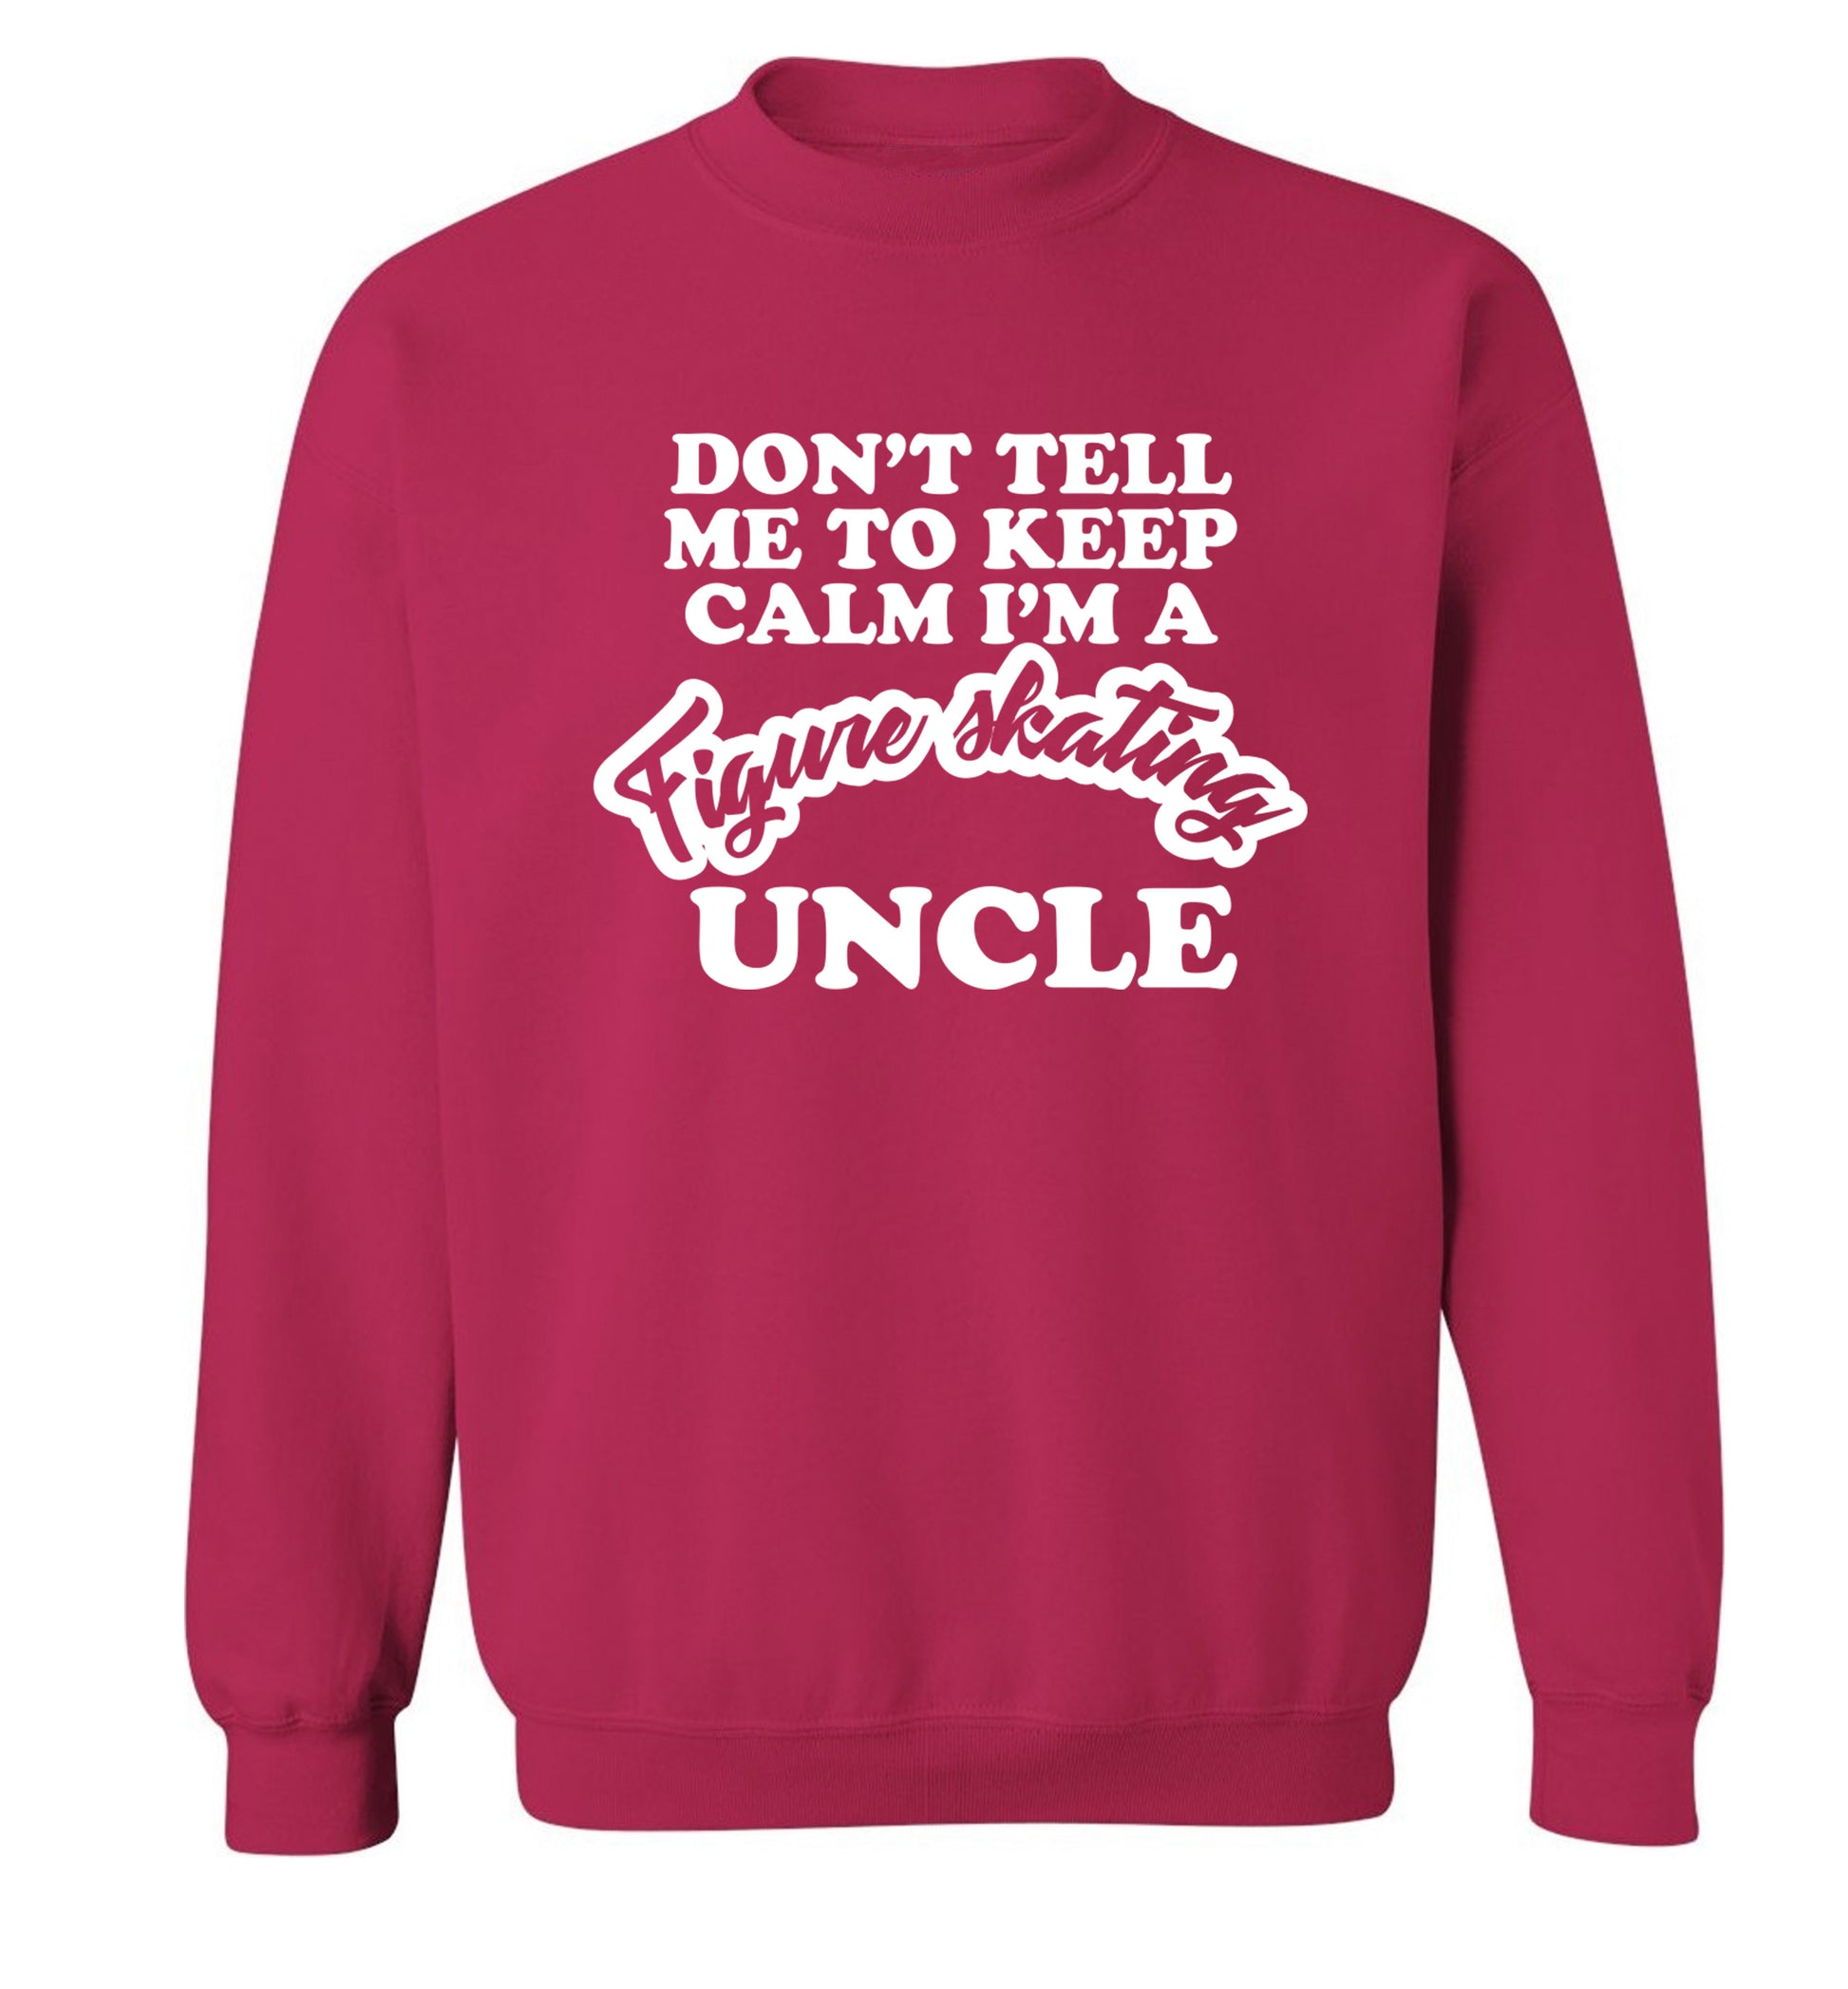 Don't tell me to keep calm I'm a figure skating uncle Adult's unisexpink Sweater 2XL